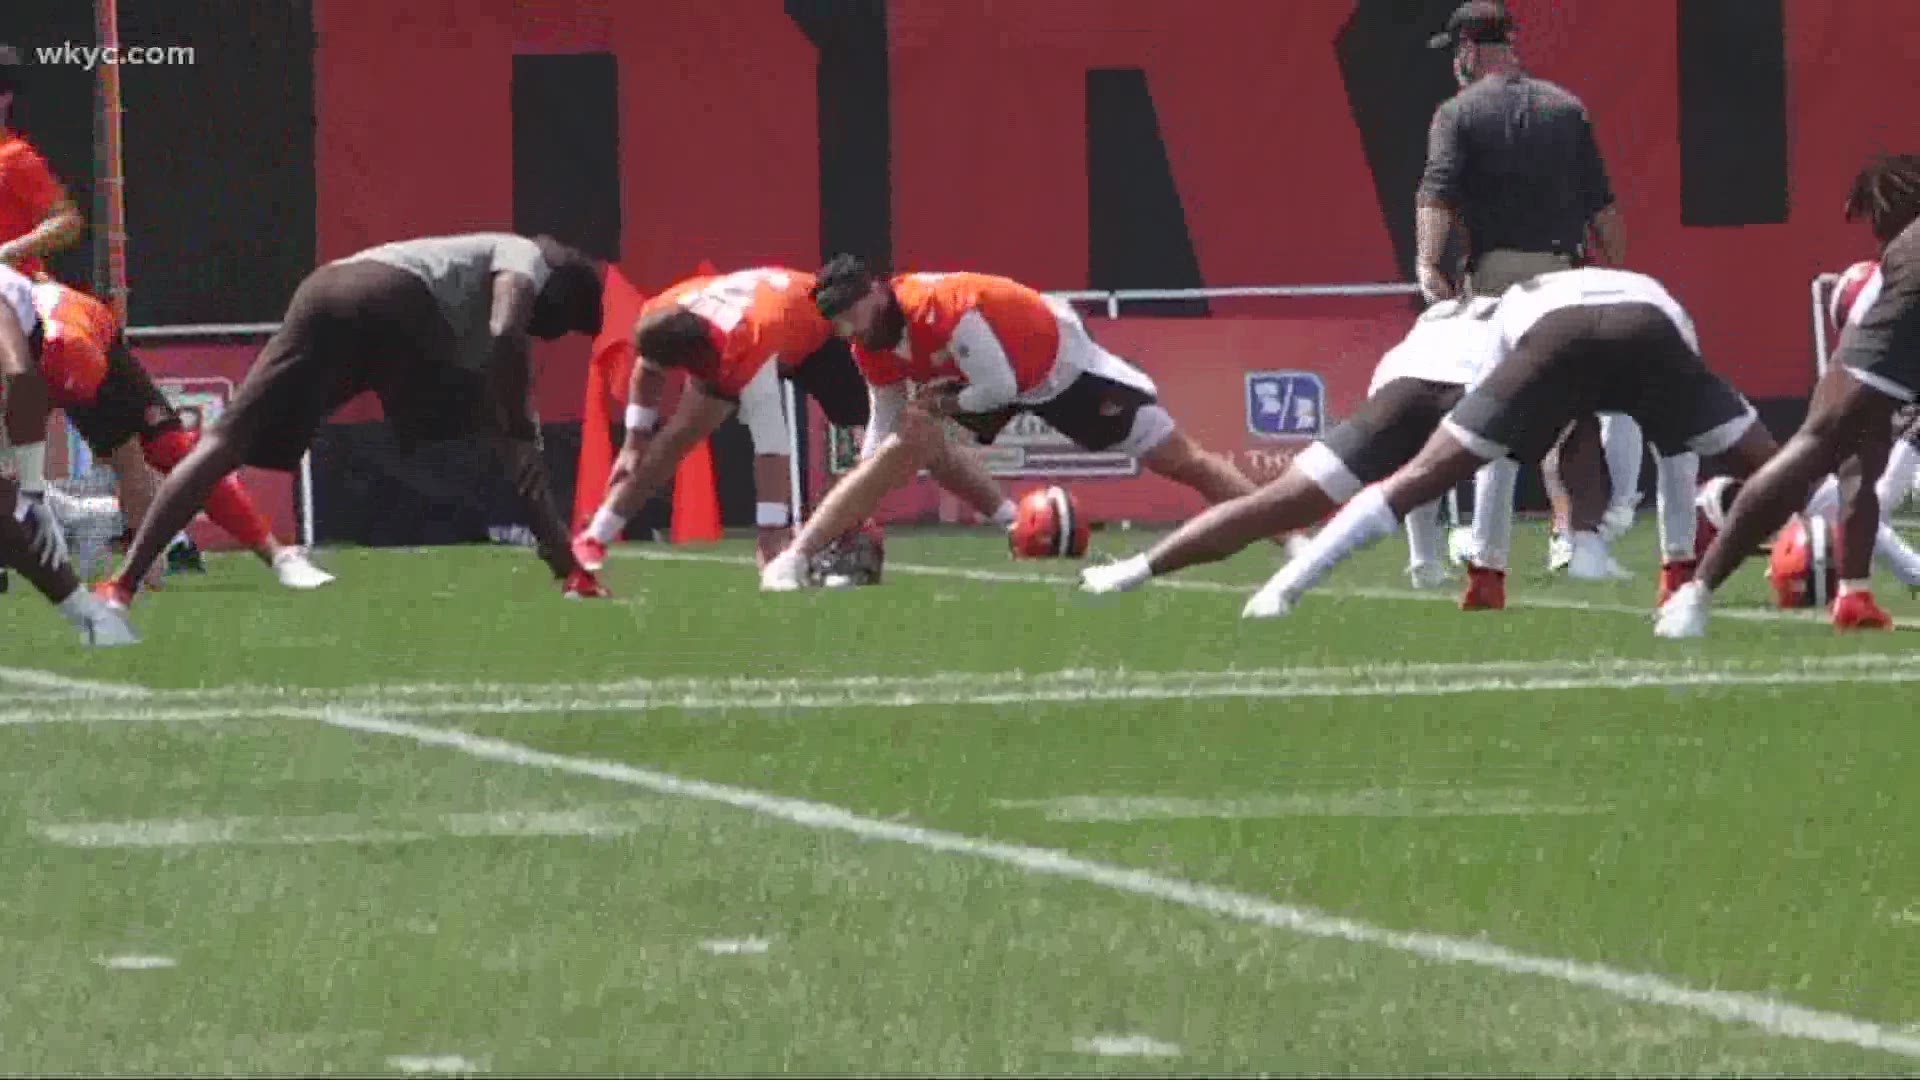 The Browns are back to work in Berea. Jim Donovan has a rundown on Day 1 of Training Camp.